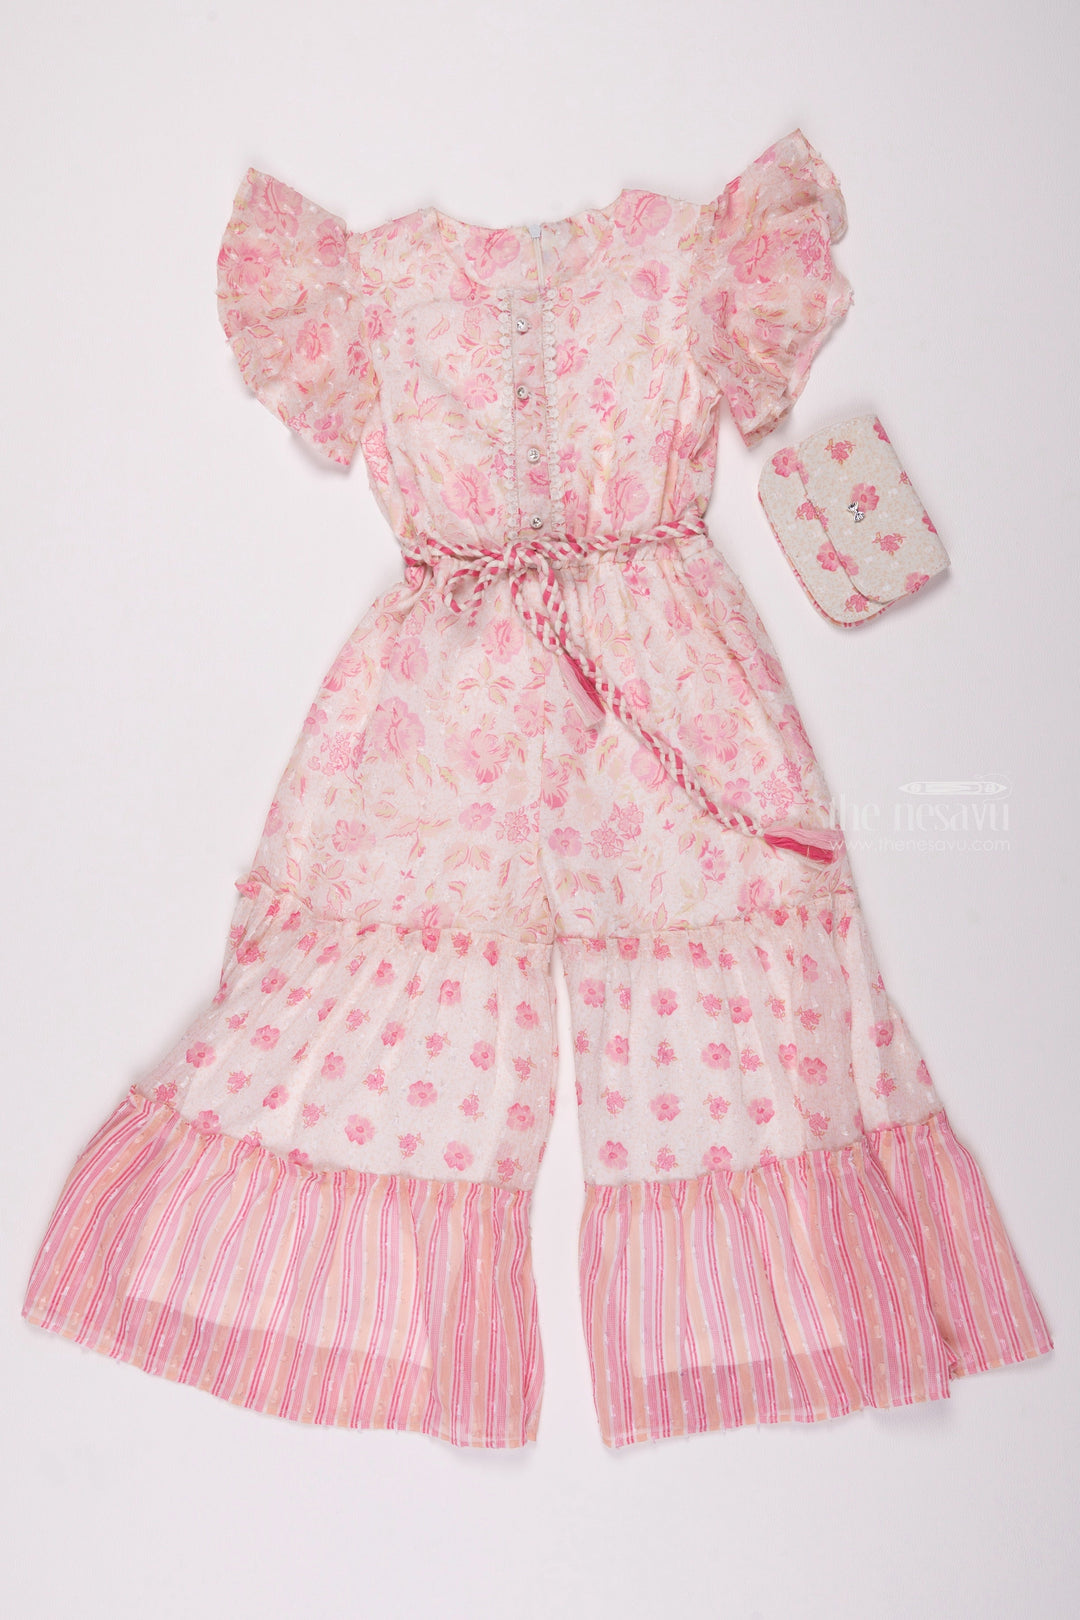 The Nesavu Girls Jumpsuit Floral Printed Pink Jumpsuit with Flare Sleeves: Stylish Charm for Girls Nesavu 24 (5Y) / Pink / Georgette GPS182B-24 Designer Jumpsuit for Girls | Stylish & Trendy Collections | The Nesavu